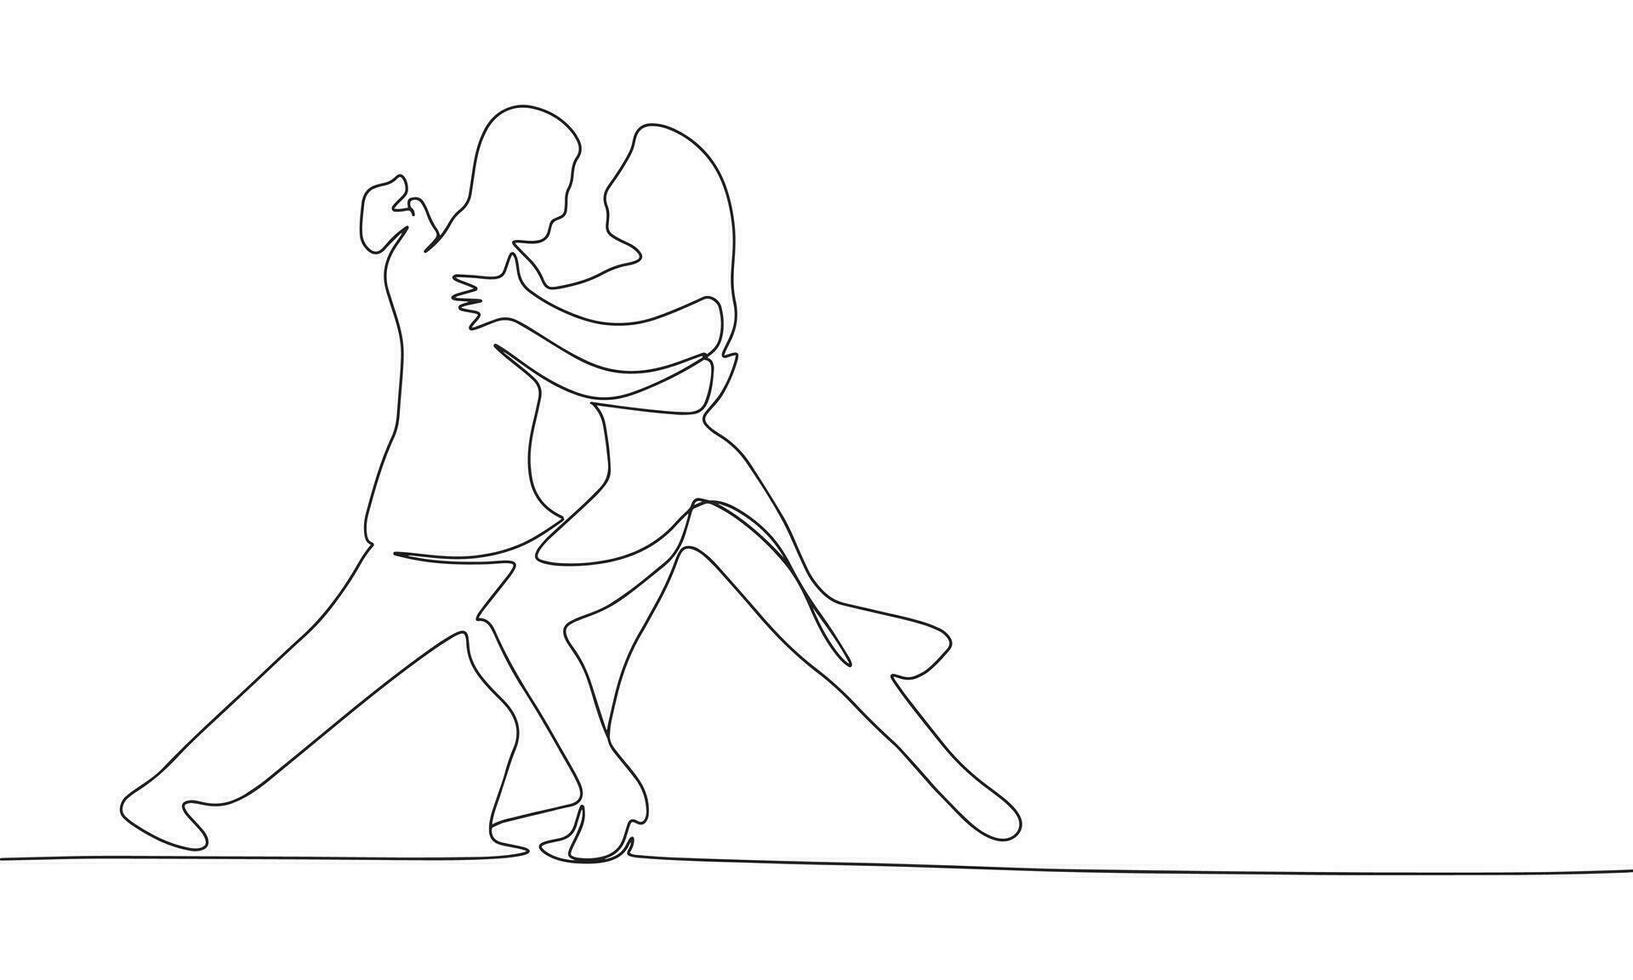 A couple is dancing one line continuous vector illustration. Concept of dance banner. Line art, outline hand draw illustration.